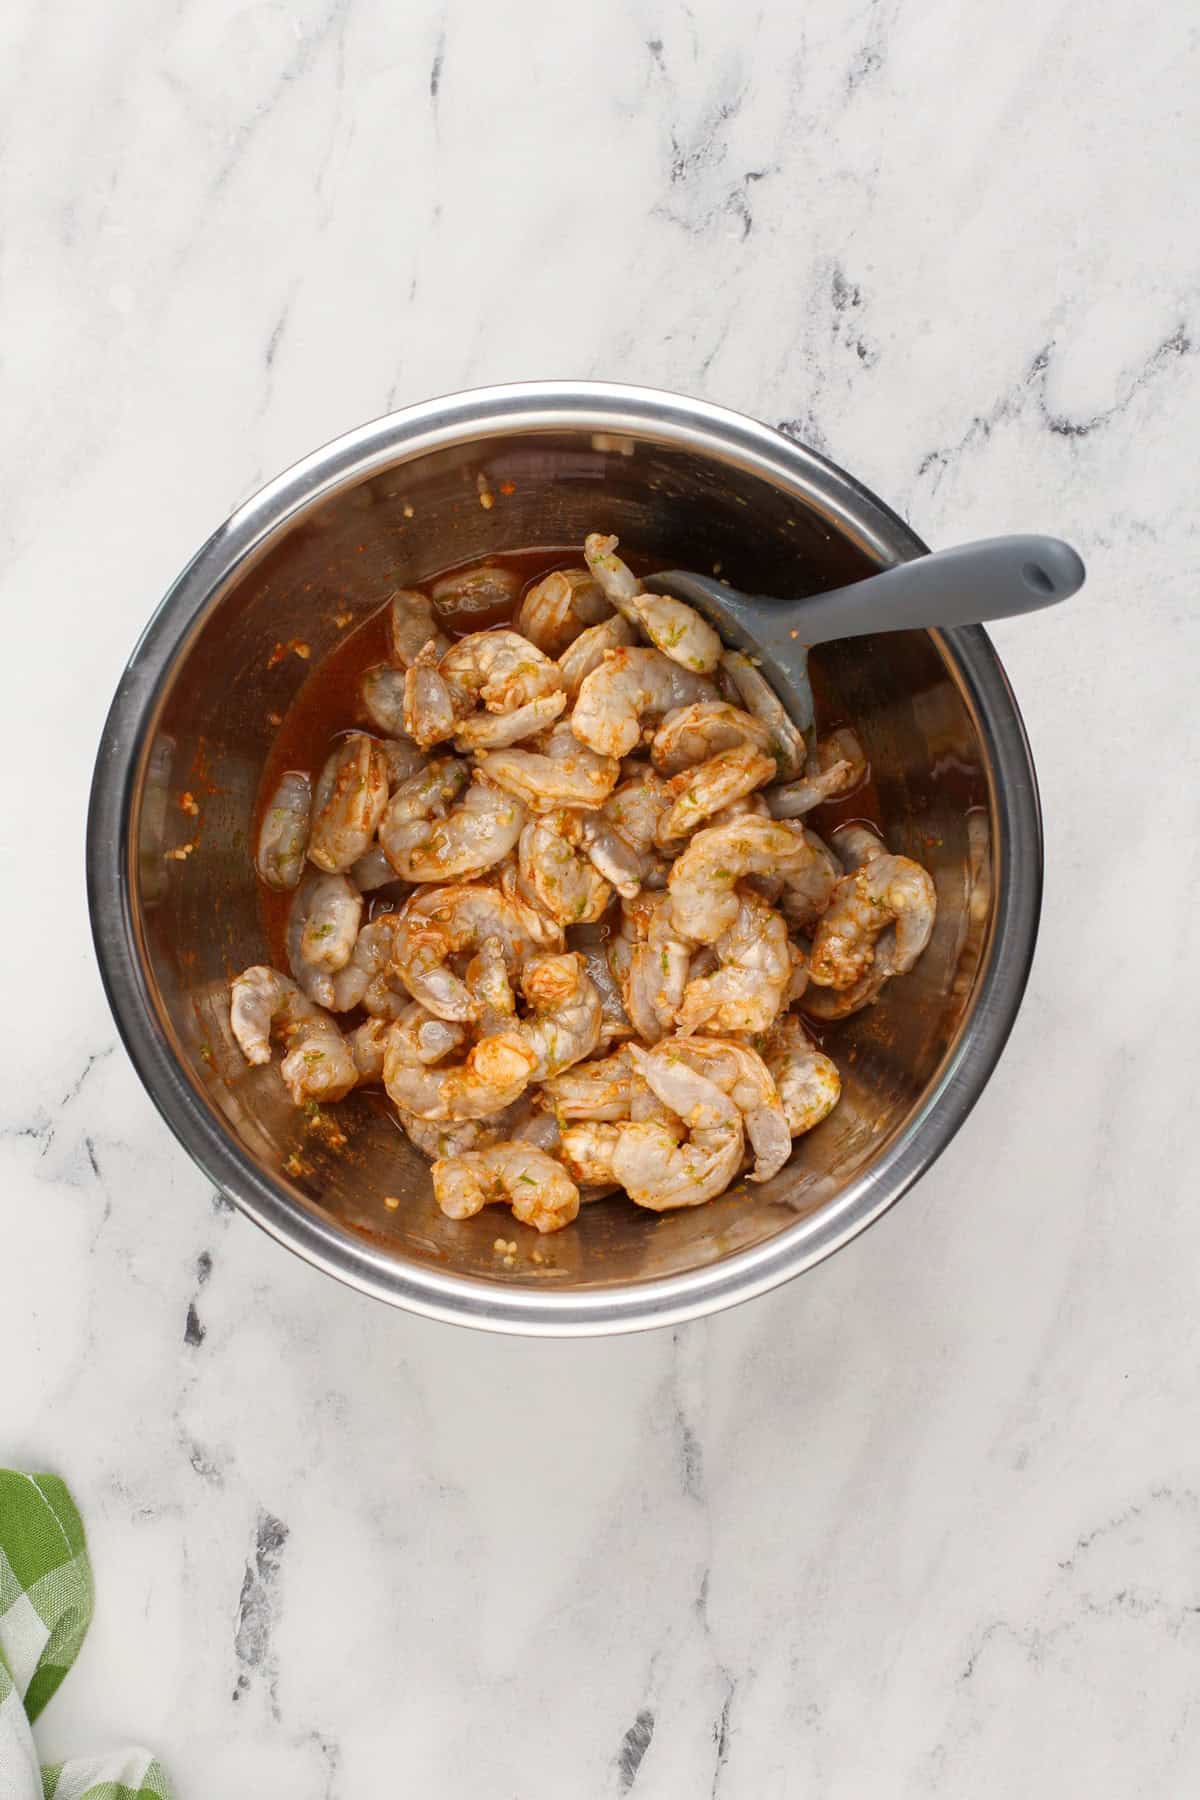 Raw shrimp being mixed with marinade in a metal bowl.